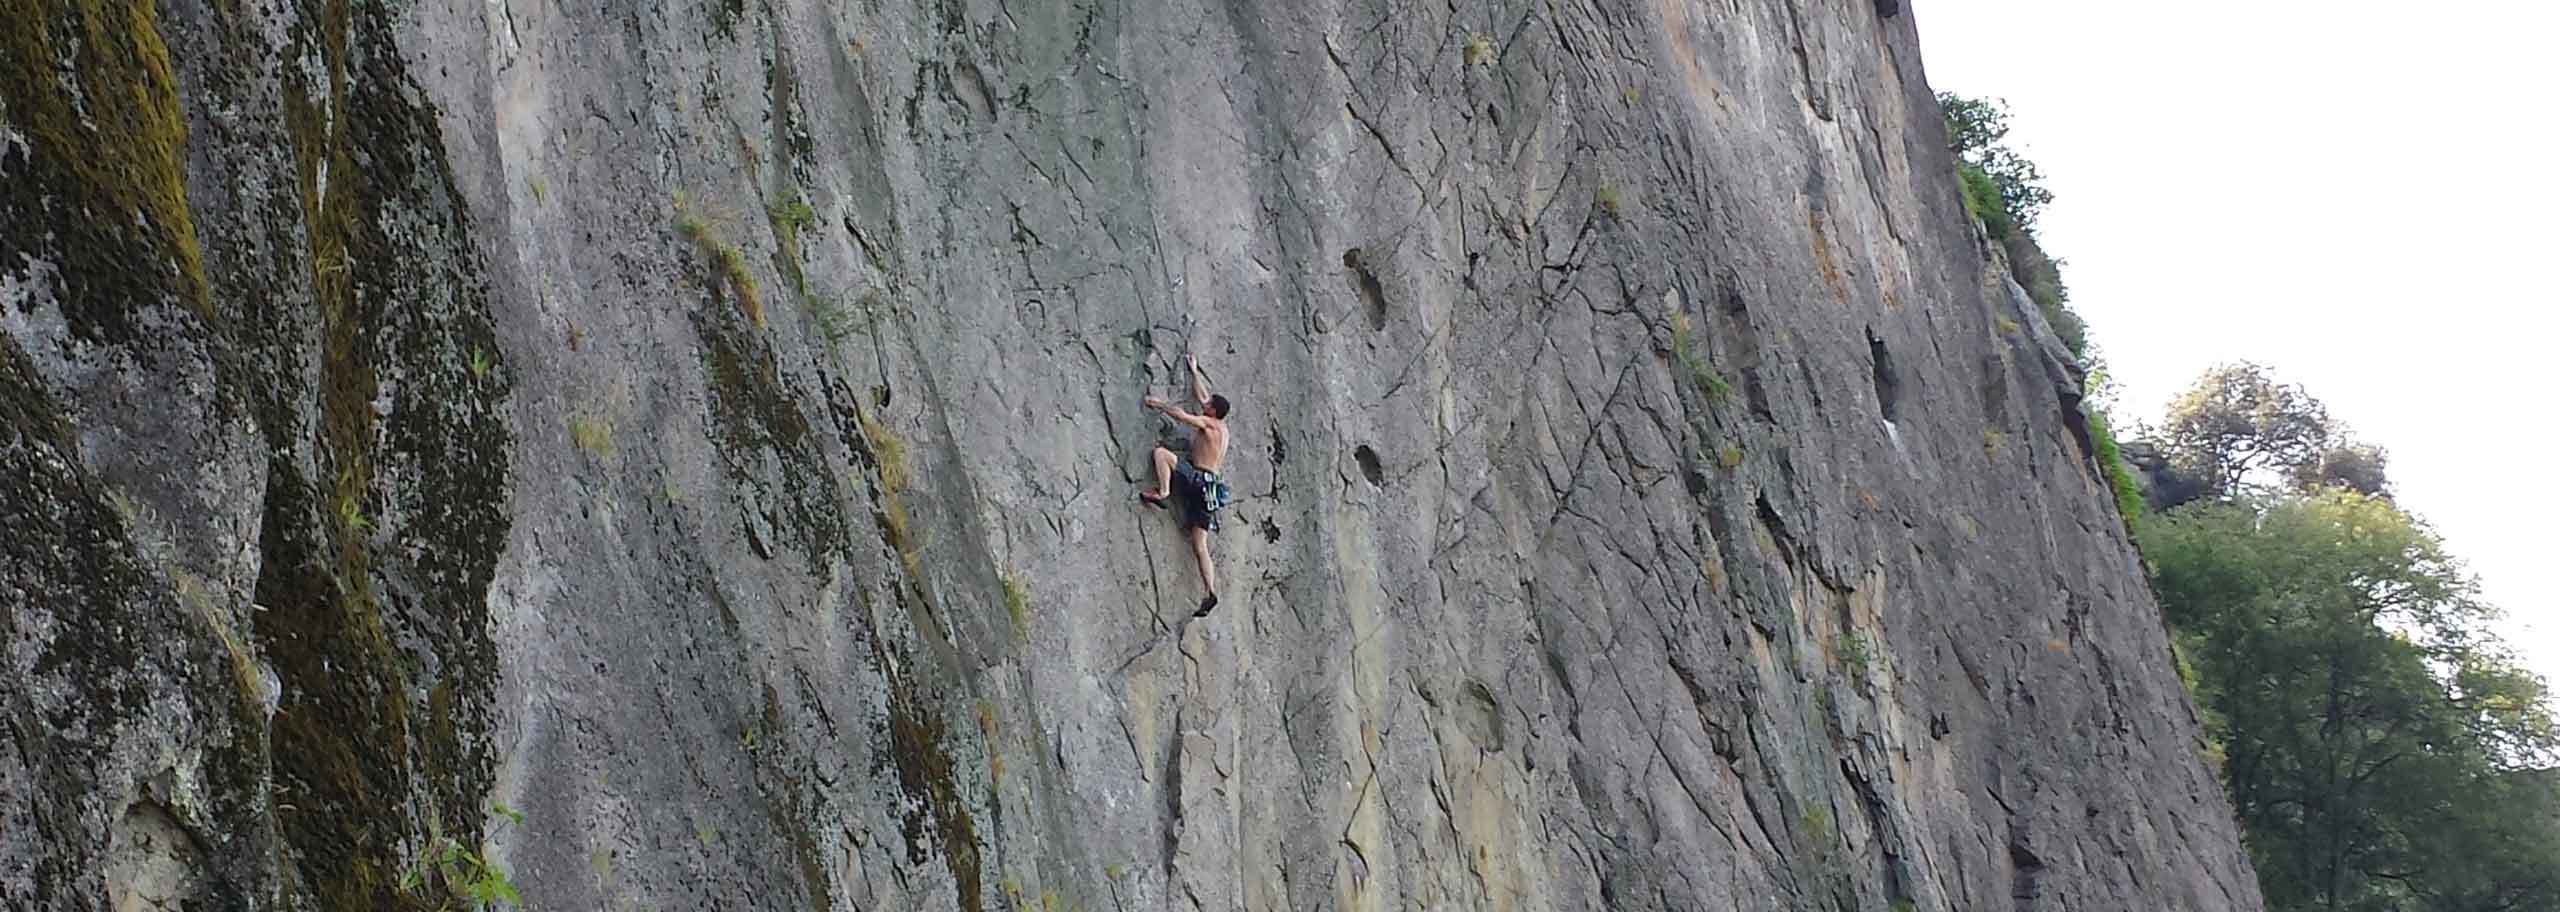 Rock Climbing in Rocca Pendice with a Mountain Guide